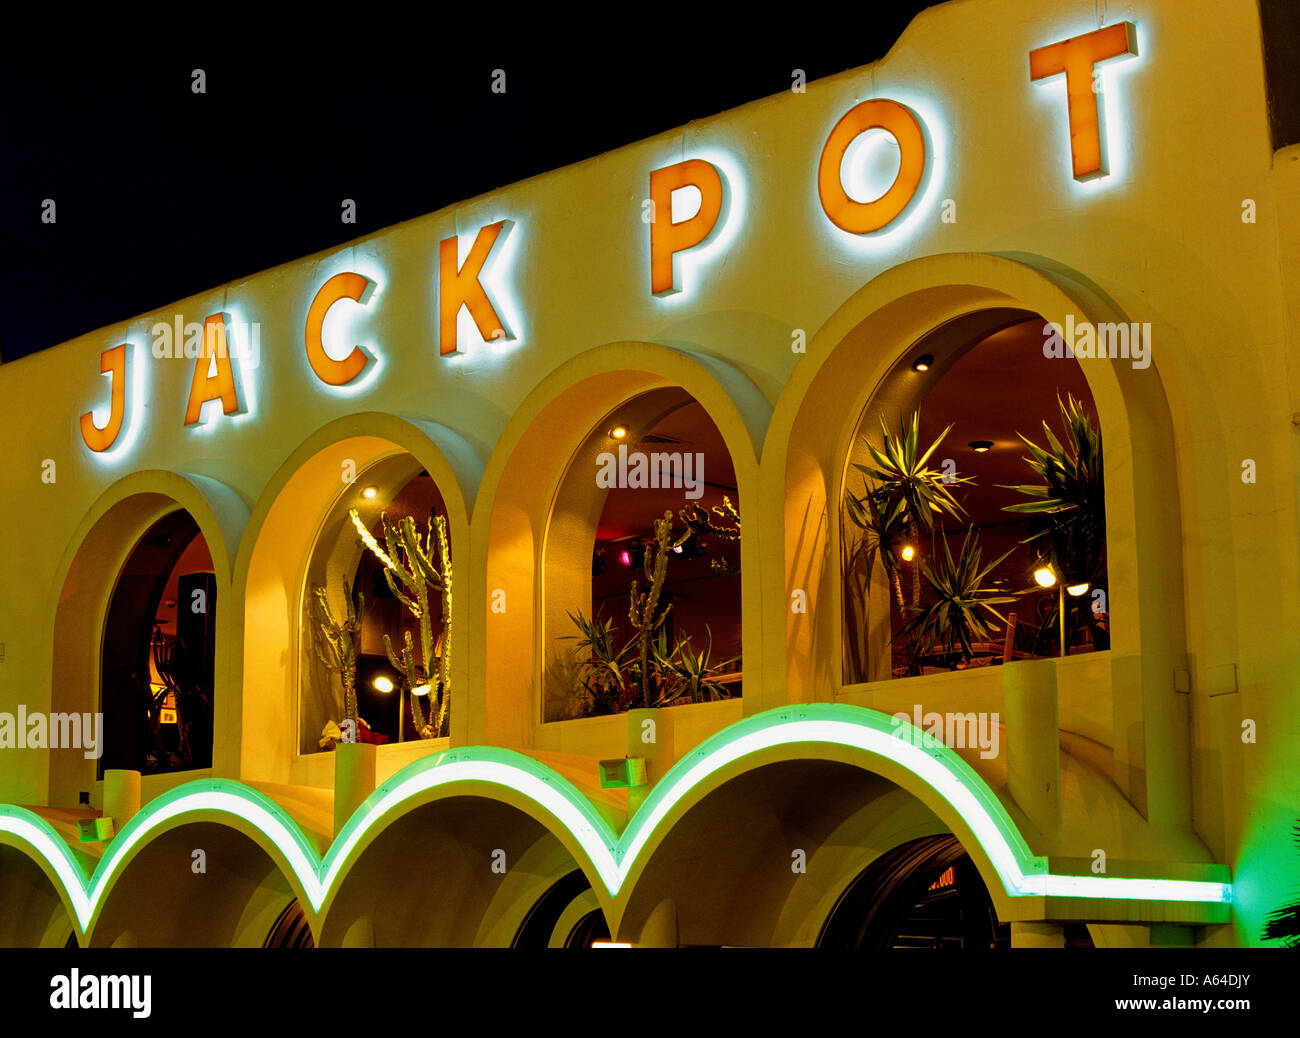 historic picture year of 2004 jackpot restaurant at night city of ibiza ciudad ibiza balearic islands spain editorial use only Stock Photo